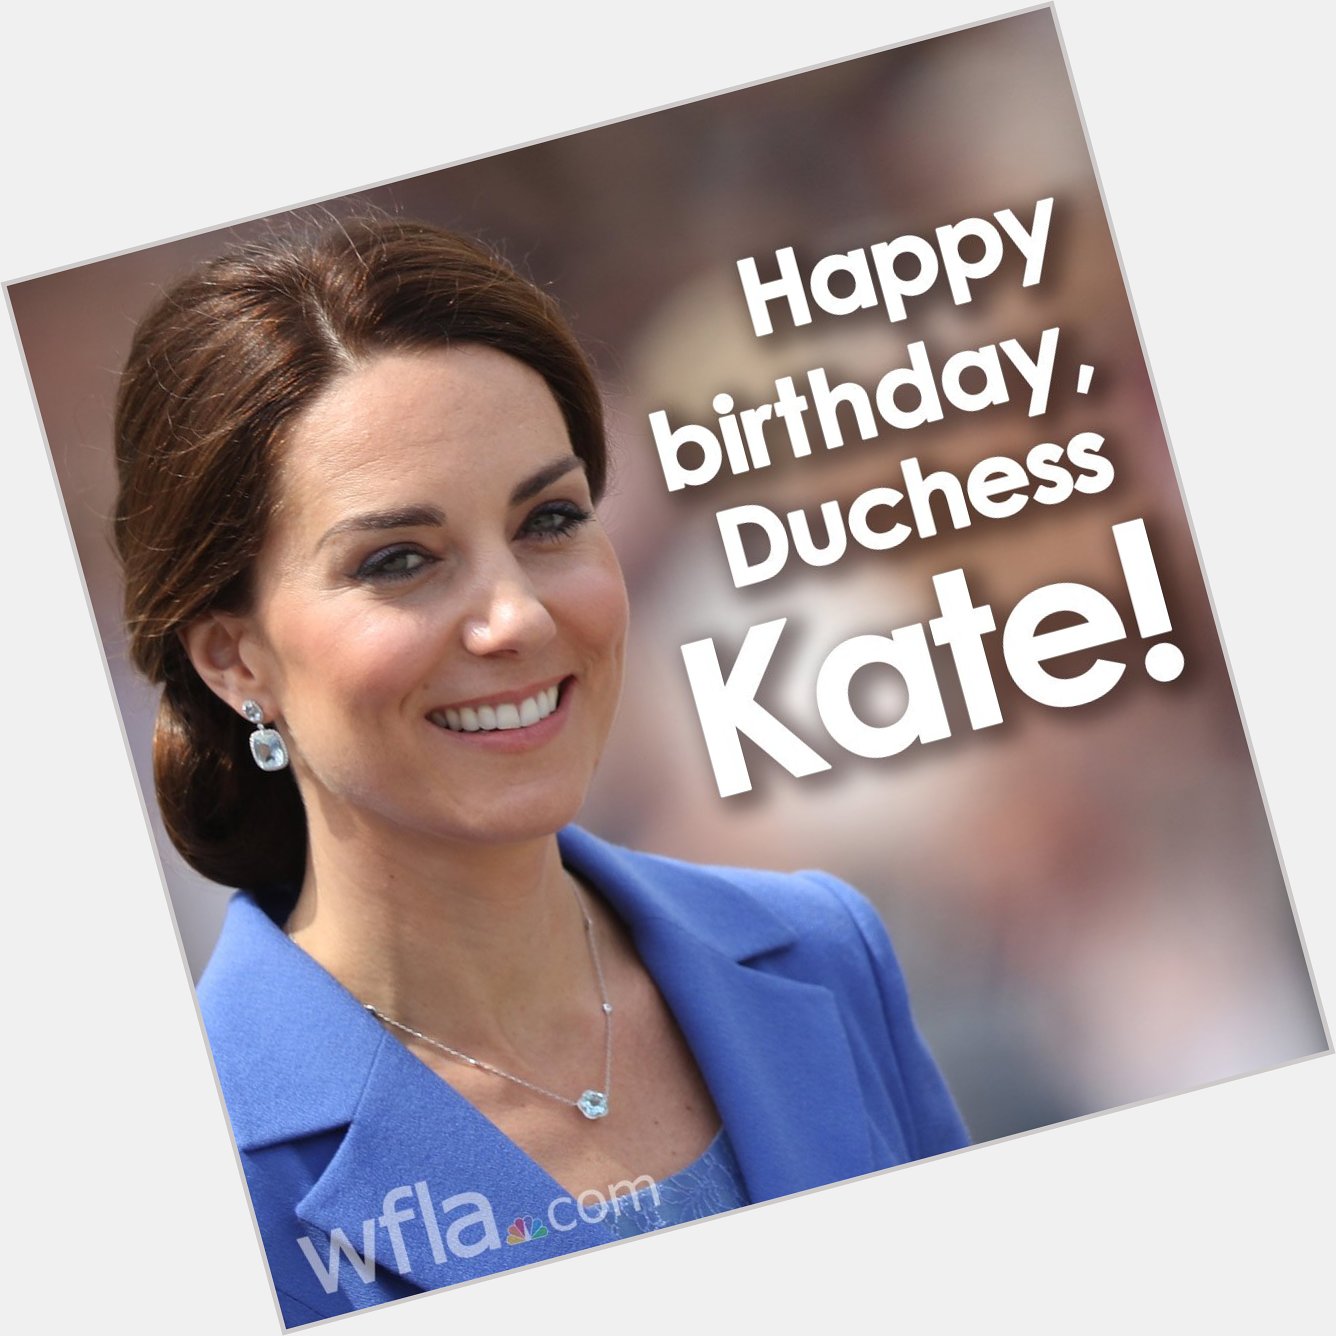 We are wishing Kate Middleton, Duchess of Cambridge, a very happy 37th birthday!  